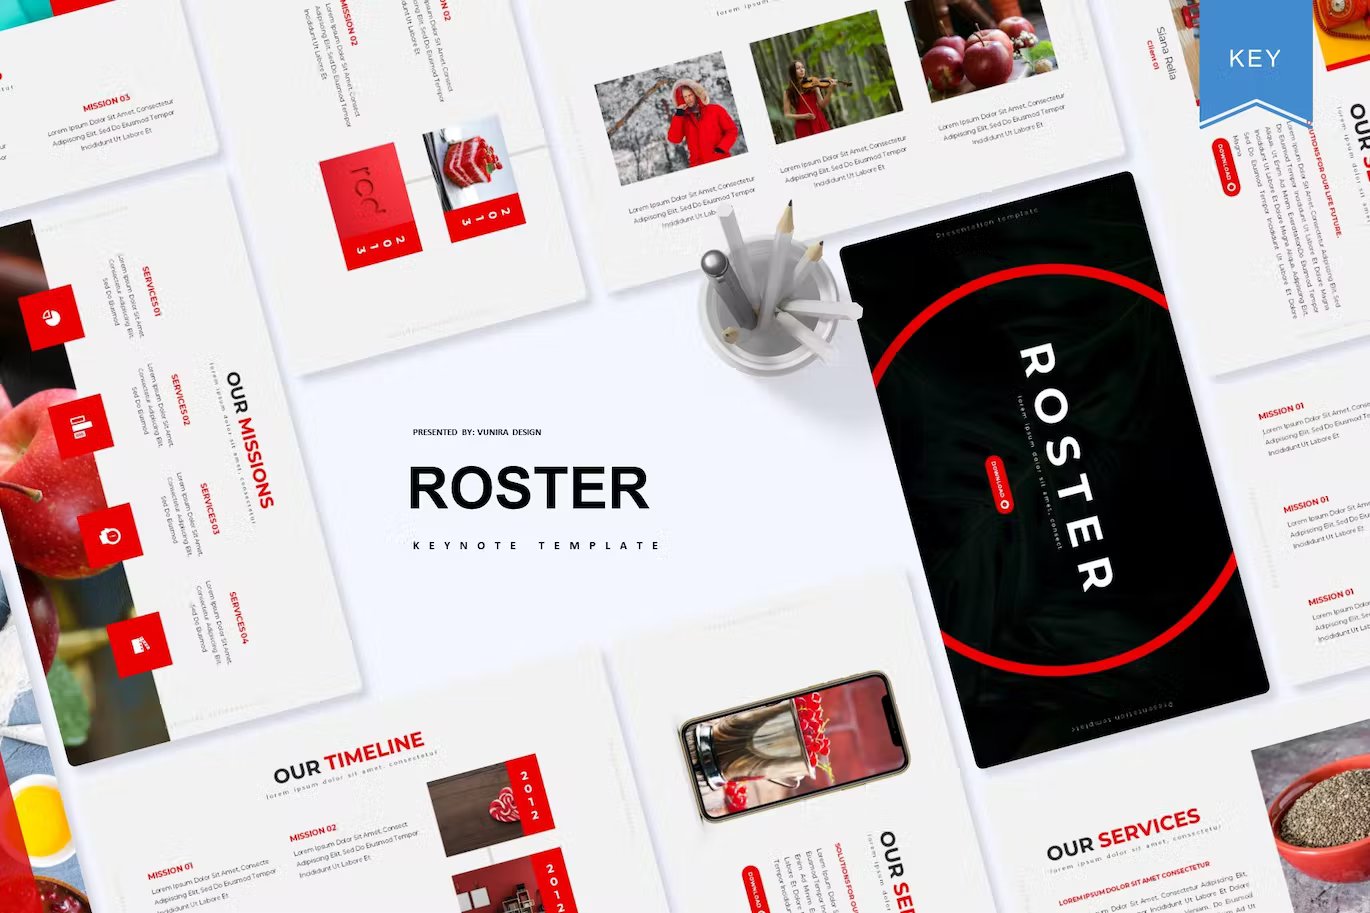 Black lettering "Roster Keynote Template" and different templates on a gray background.